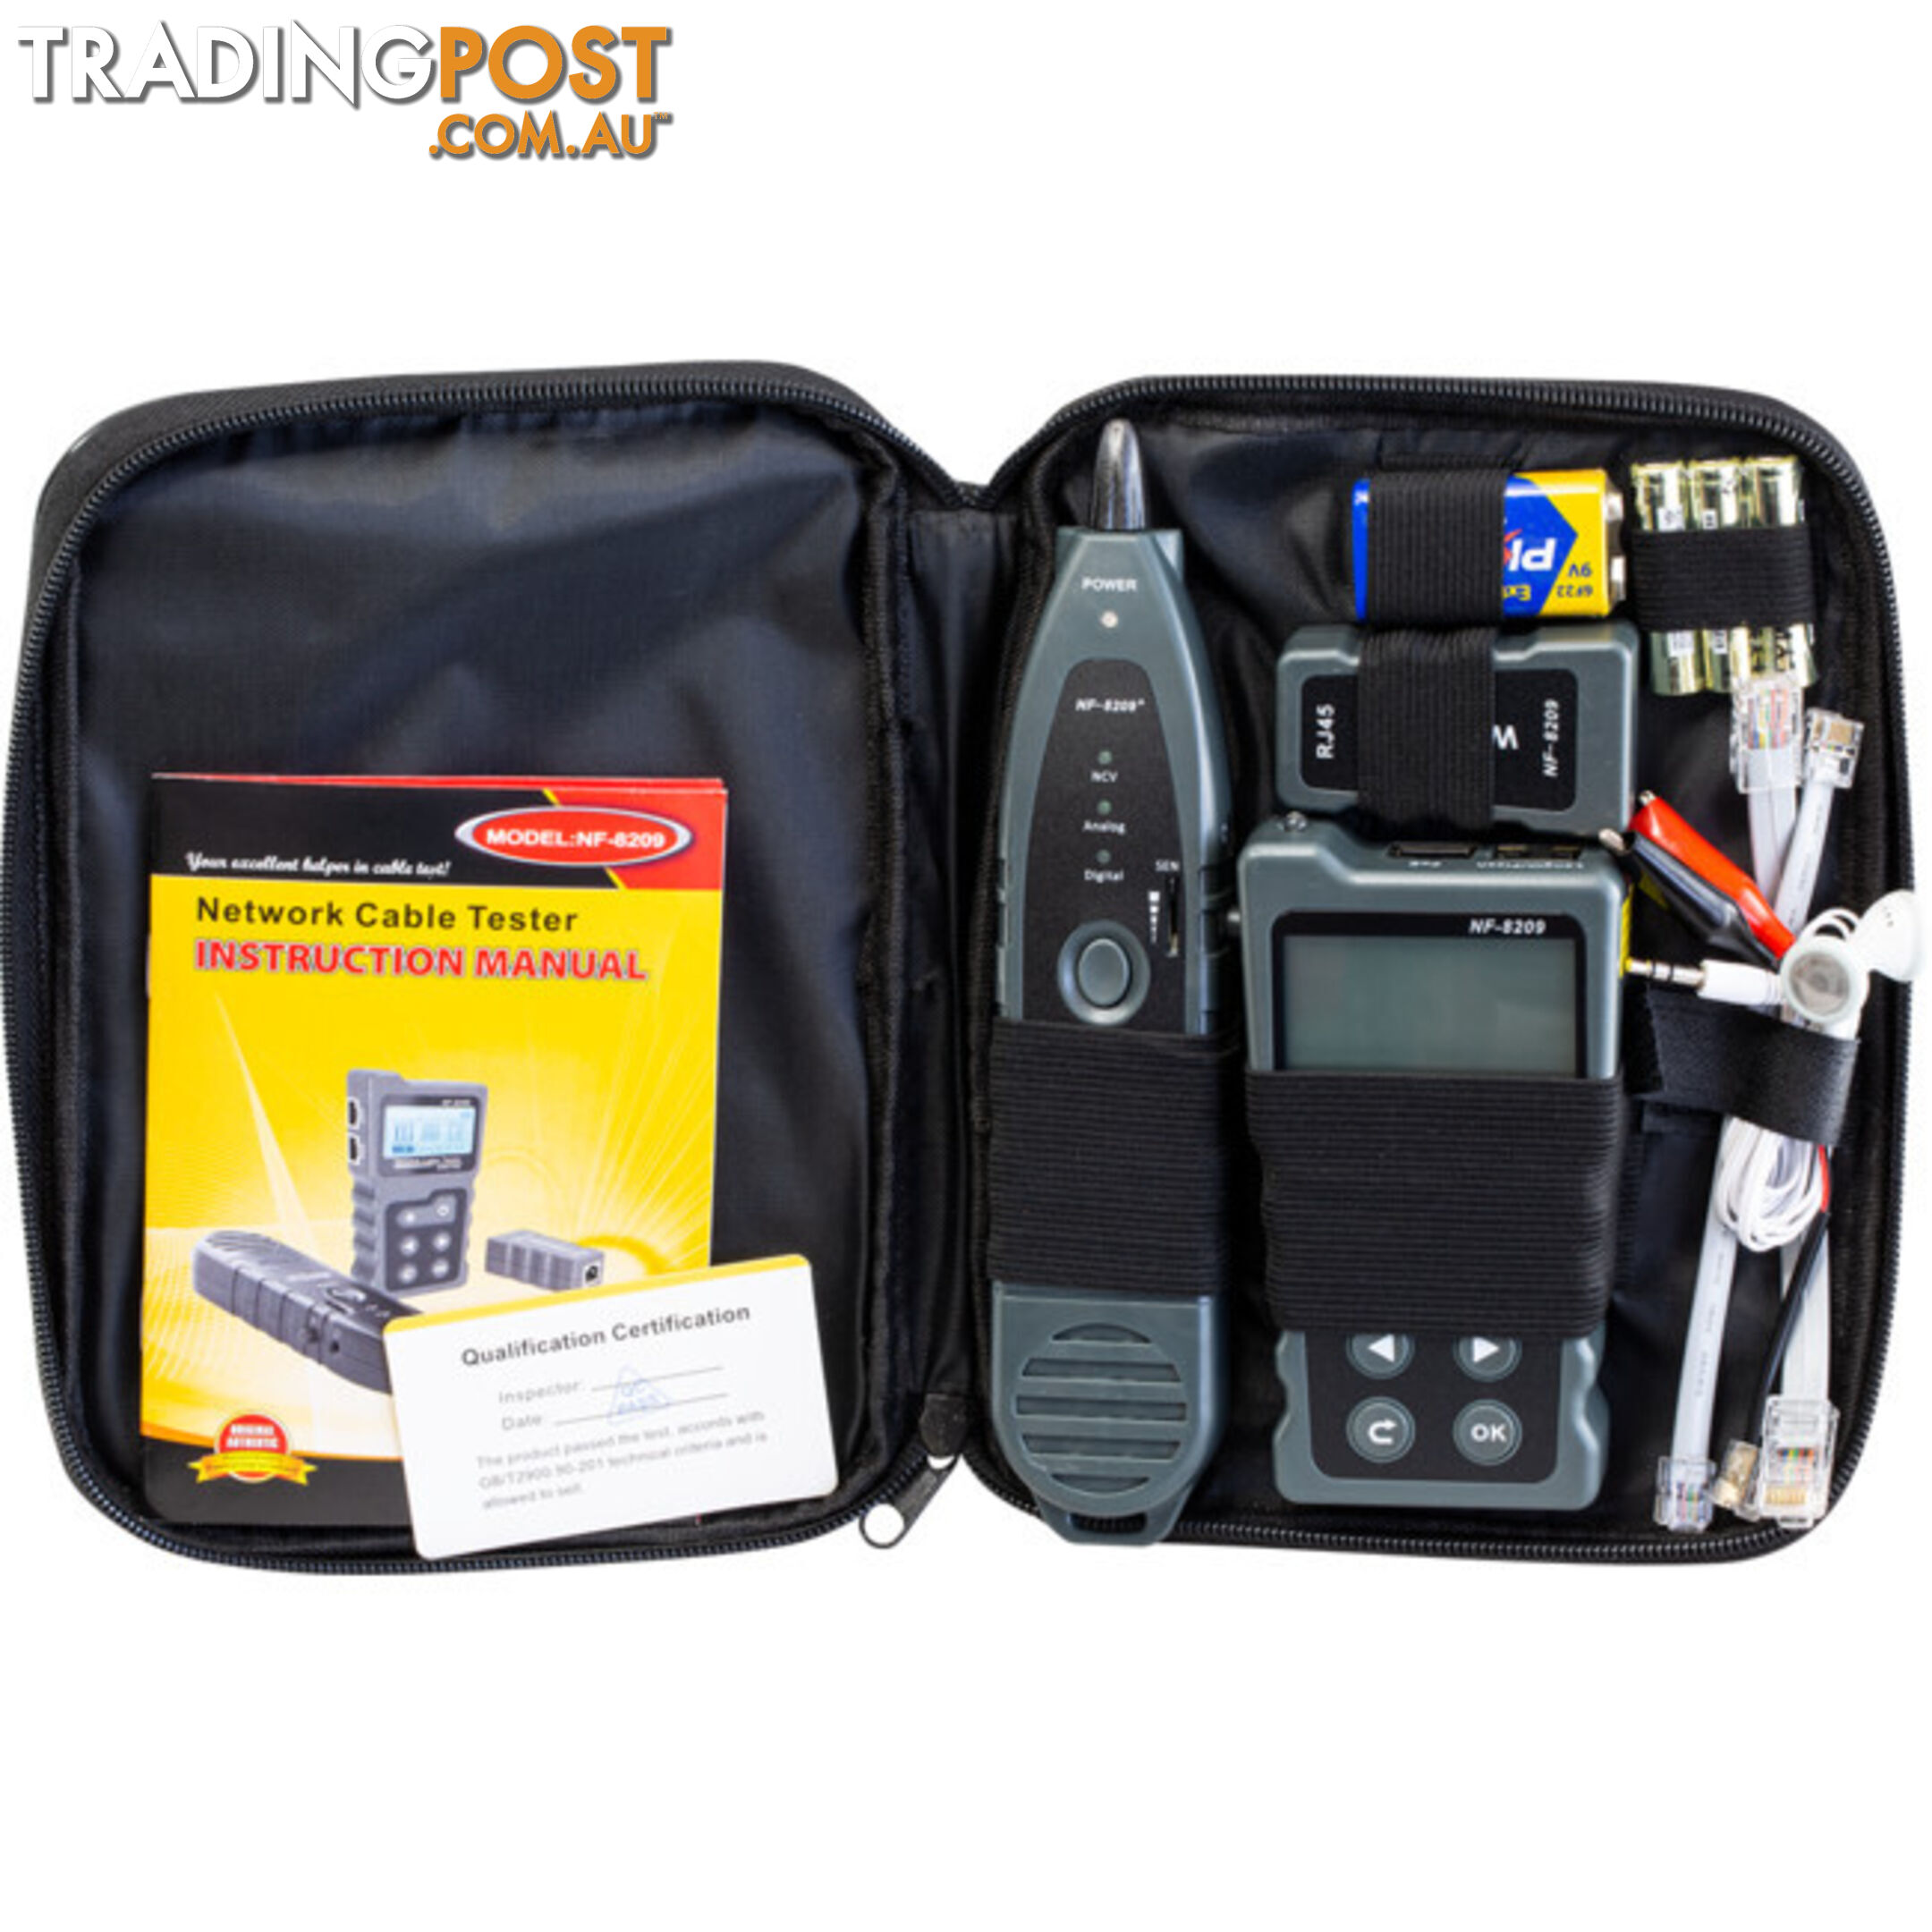 NF8209 MULTIFUNCTION CABLE TESTER POE LENGTH WIREMAP PORT FLASH